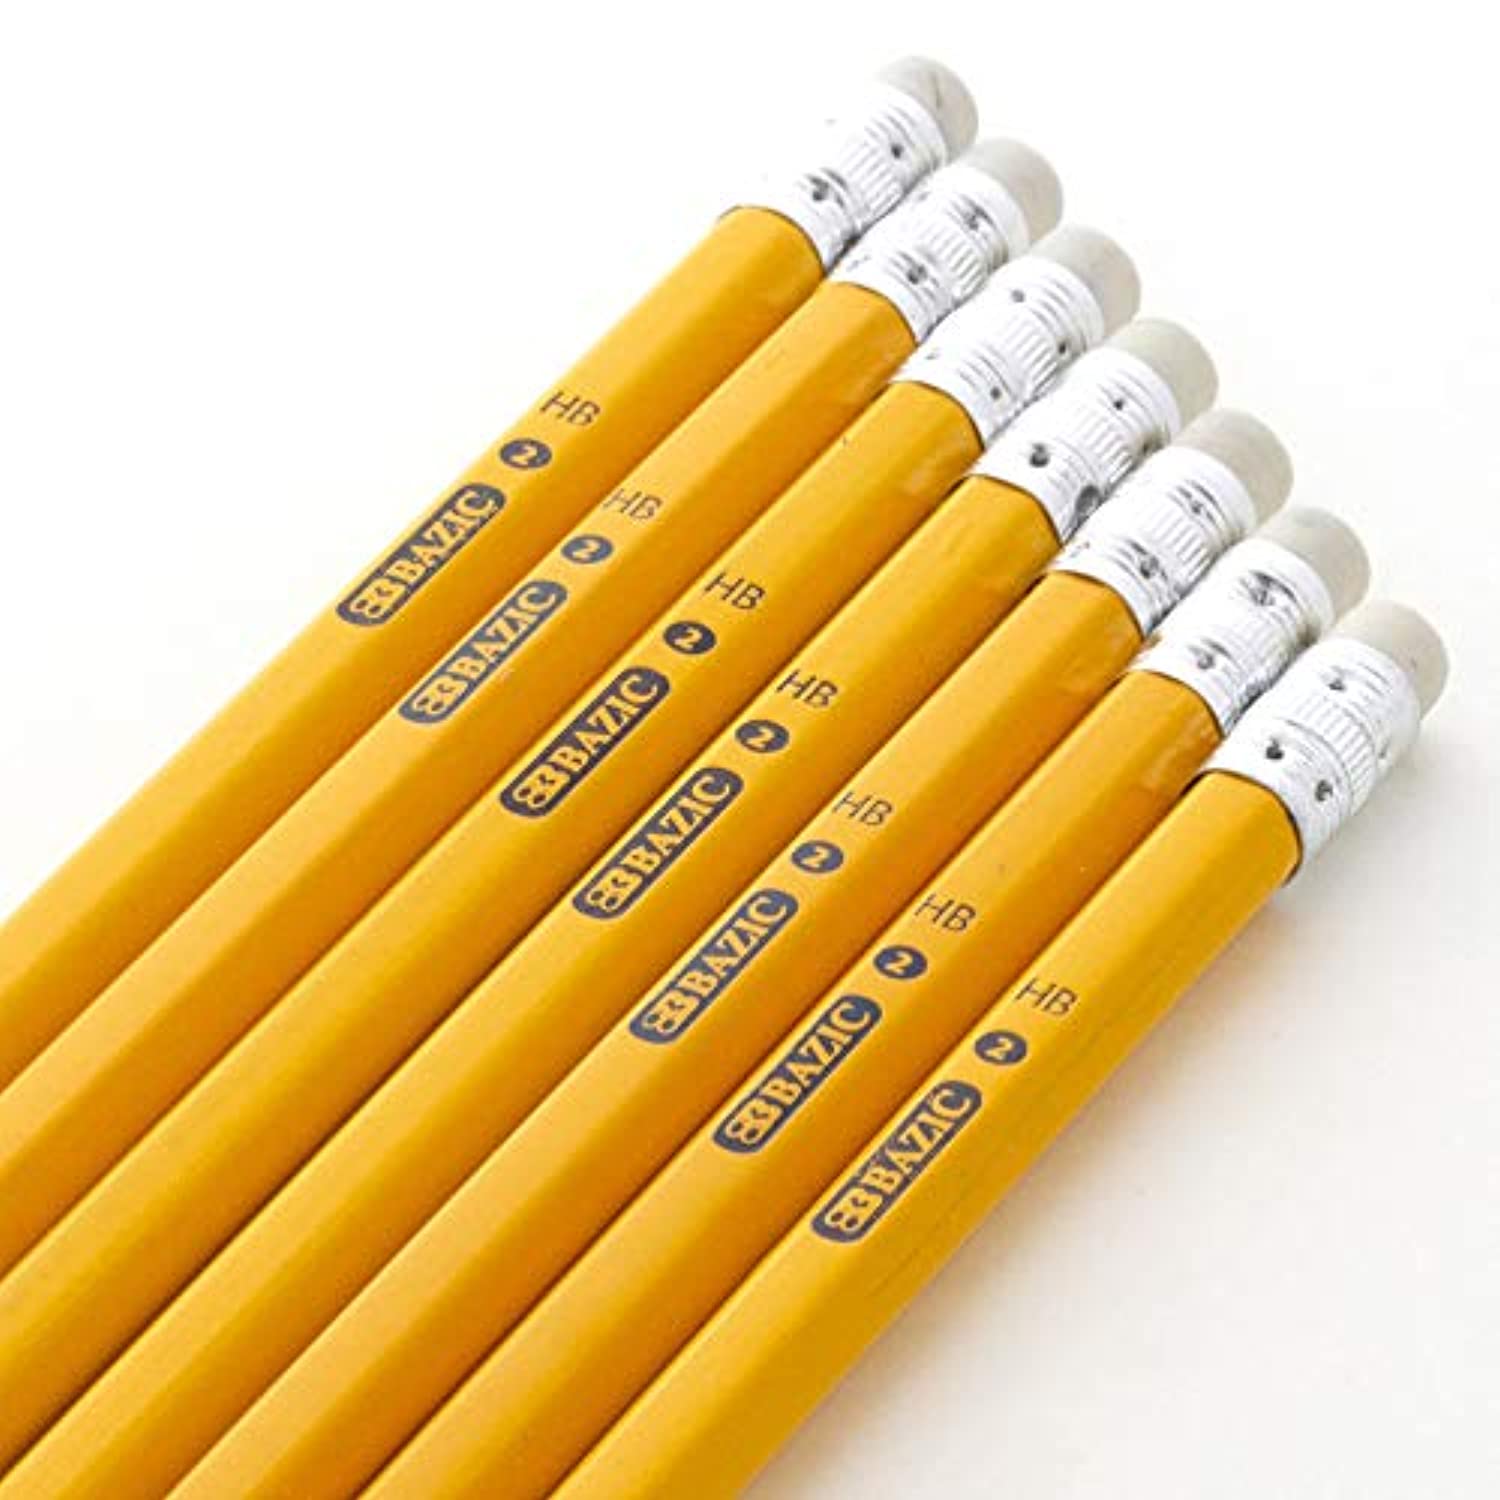 Yellow Pencil (12/Pack) #2.